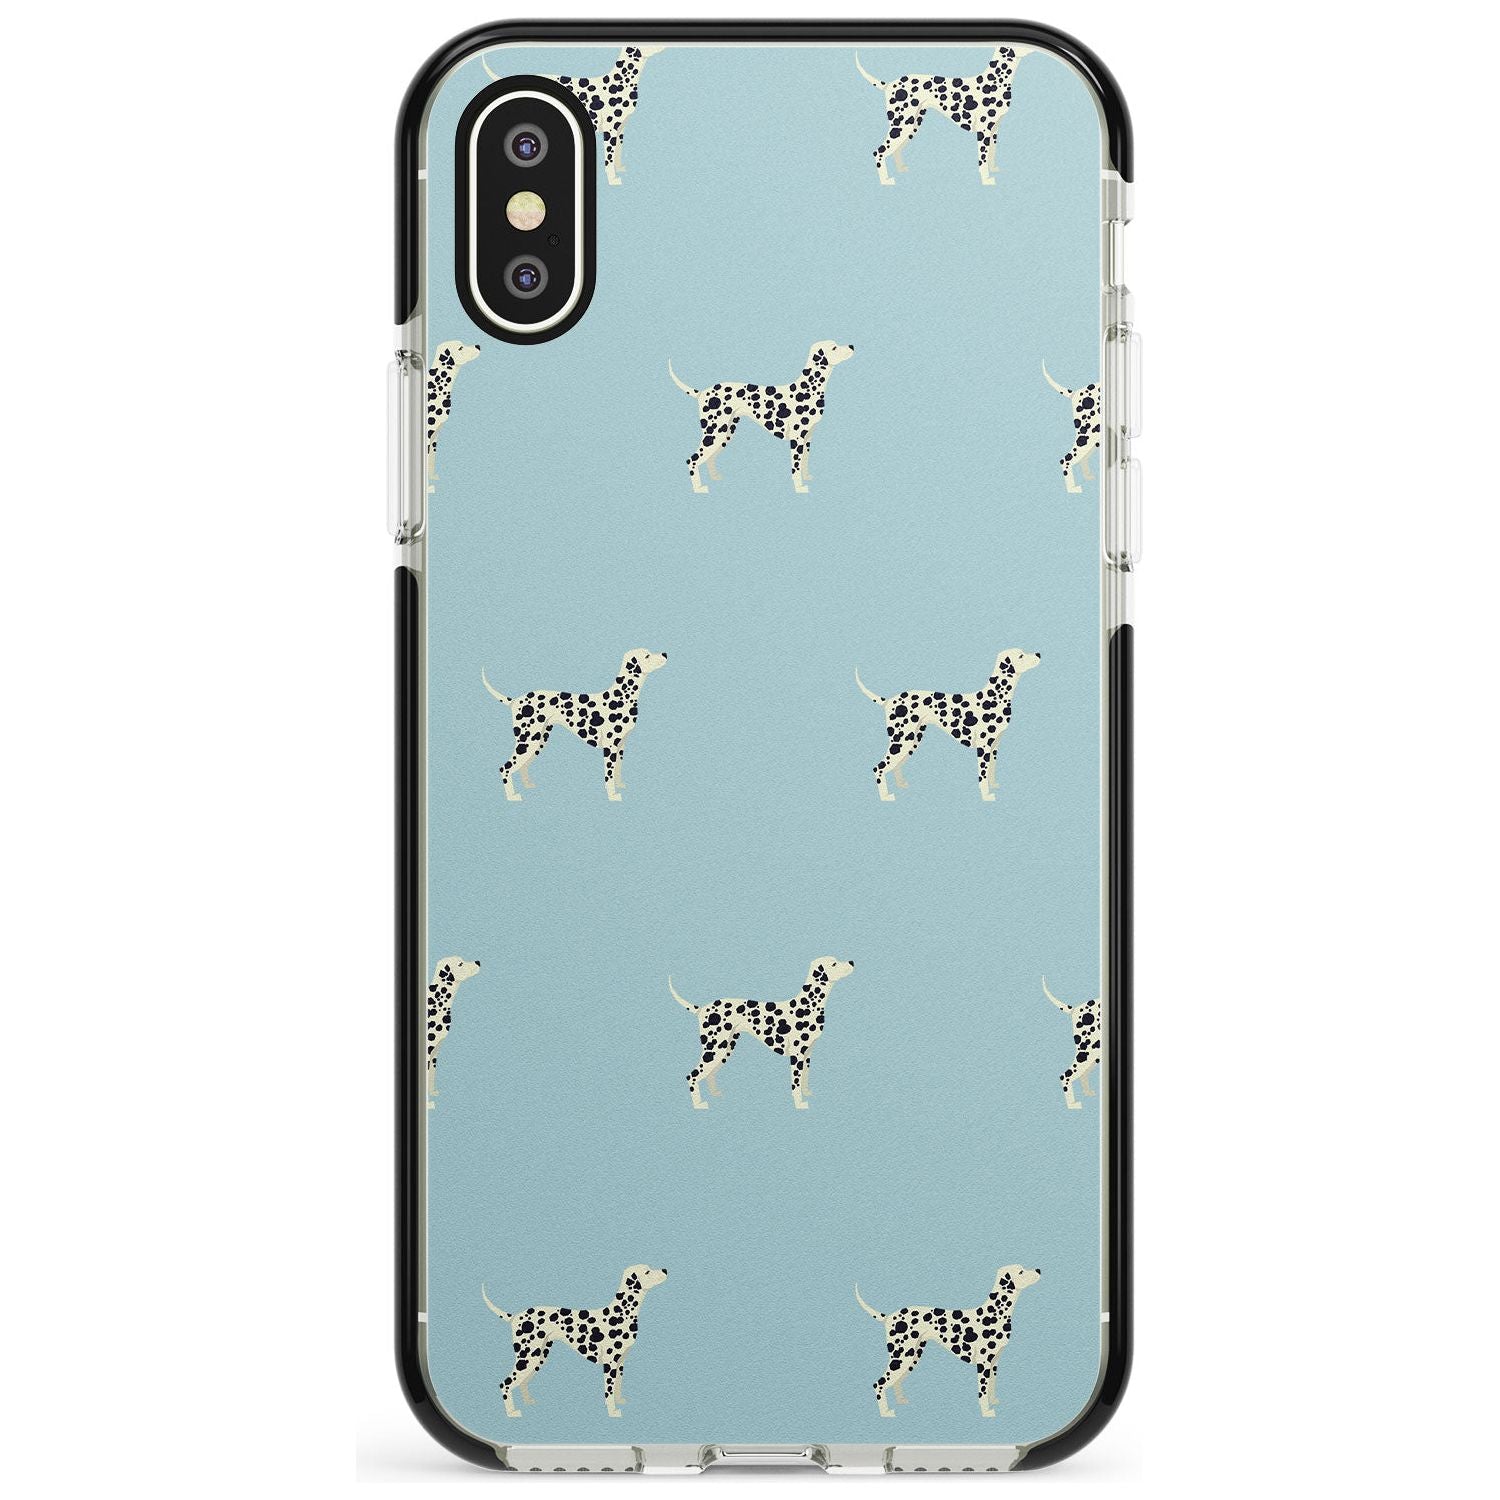 Dalmation Dog Pattern Black Impact Phone Case for iPhone X XS Max XR